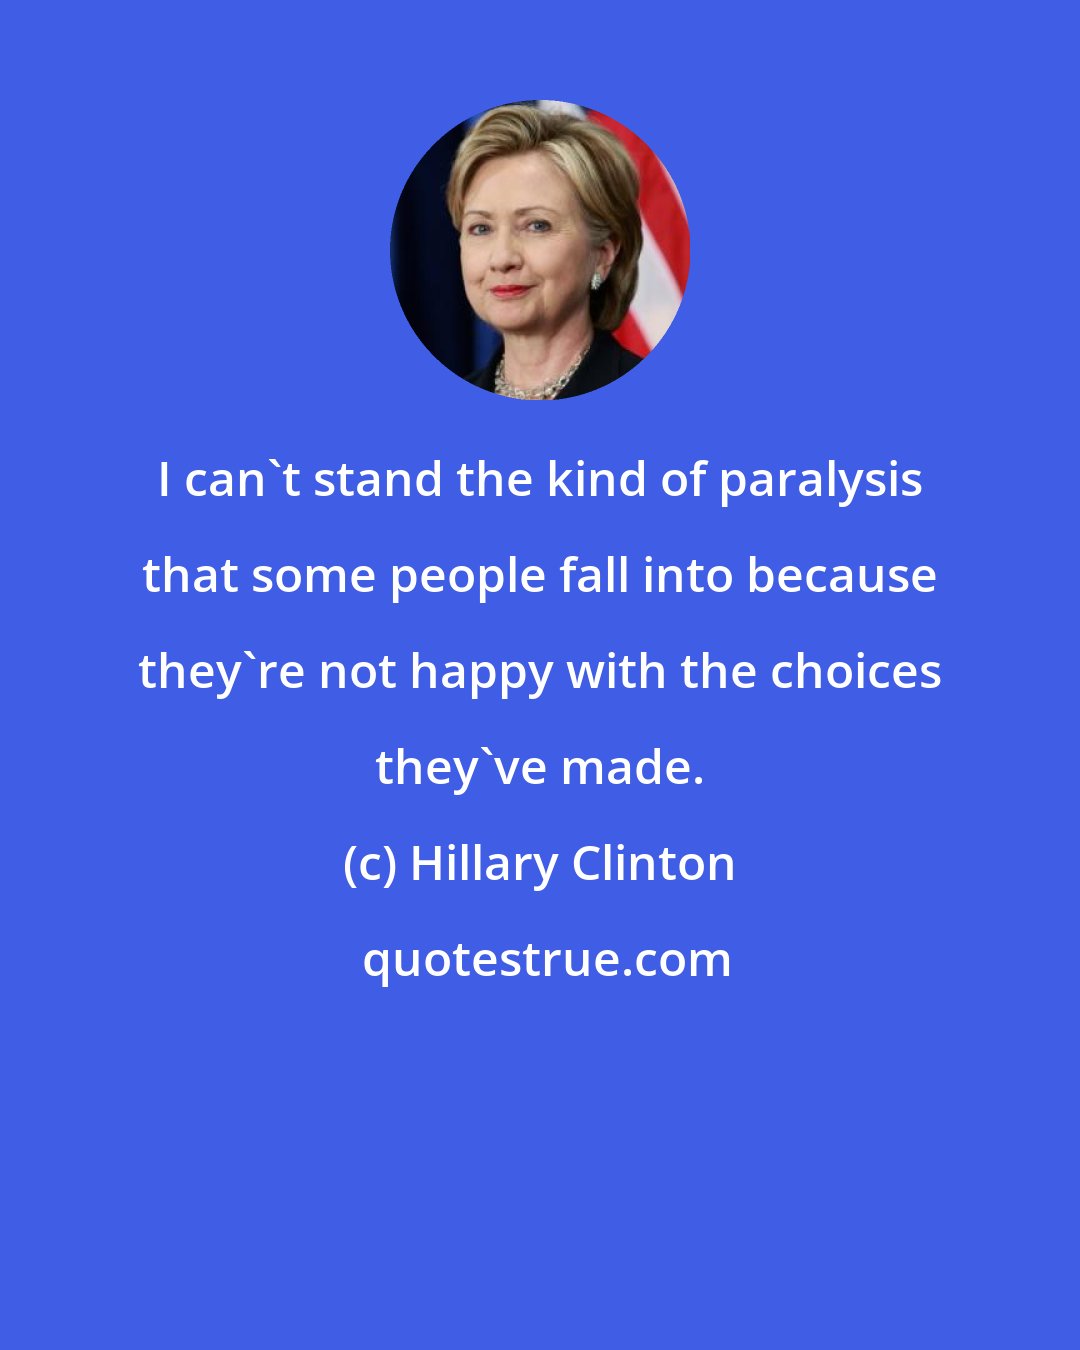 Hillary Clinton: I can't stand the kind of paralysis that some people fall into because they're not happy with the choices they've made.